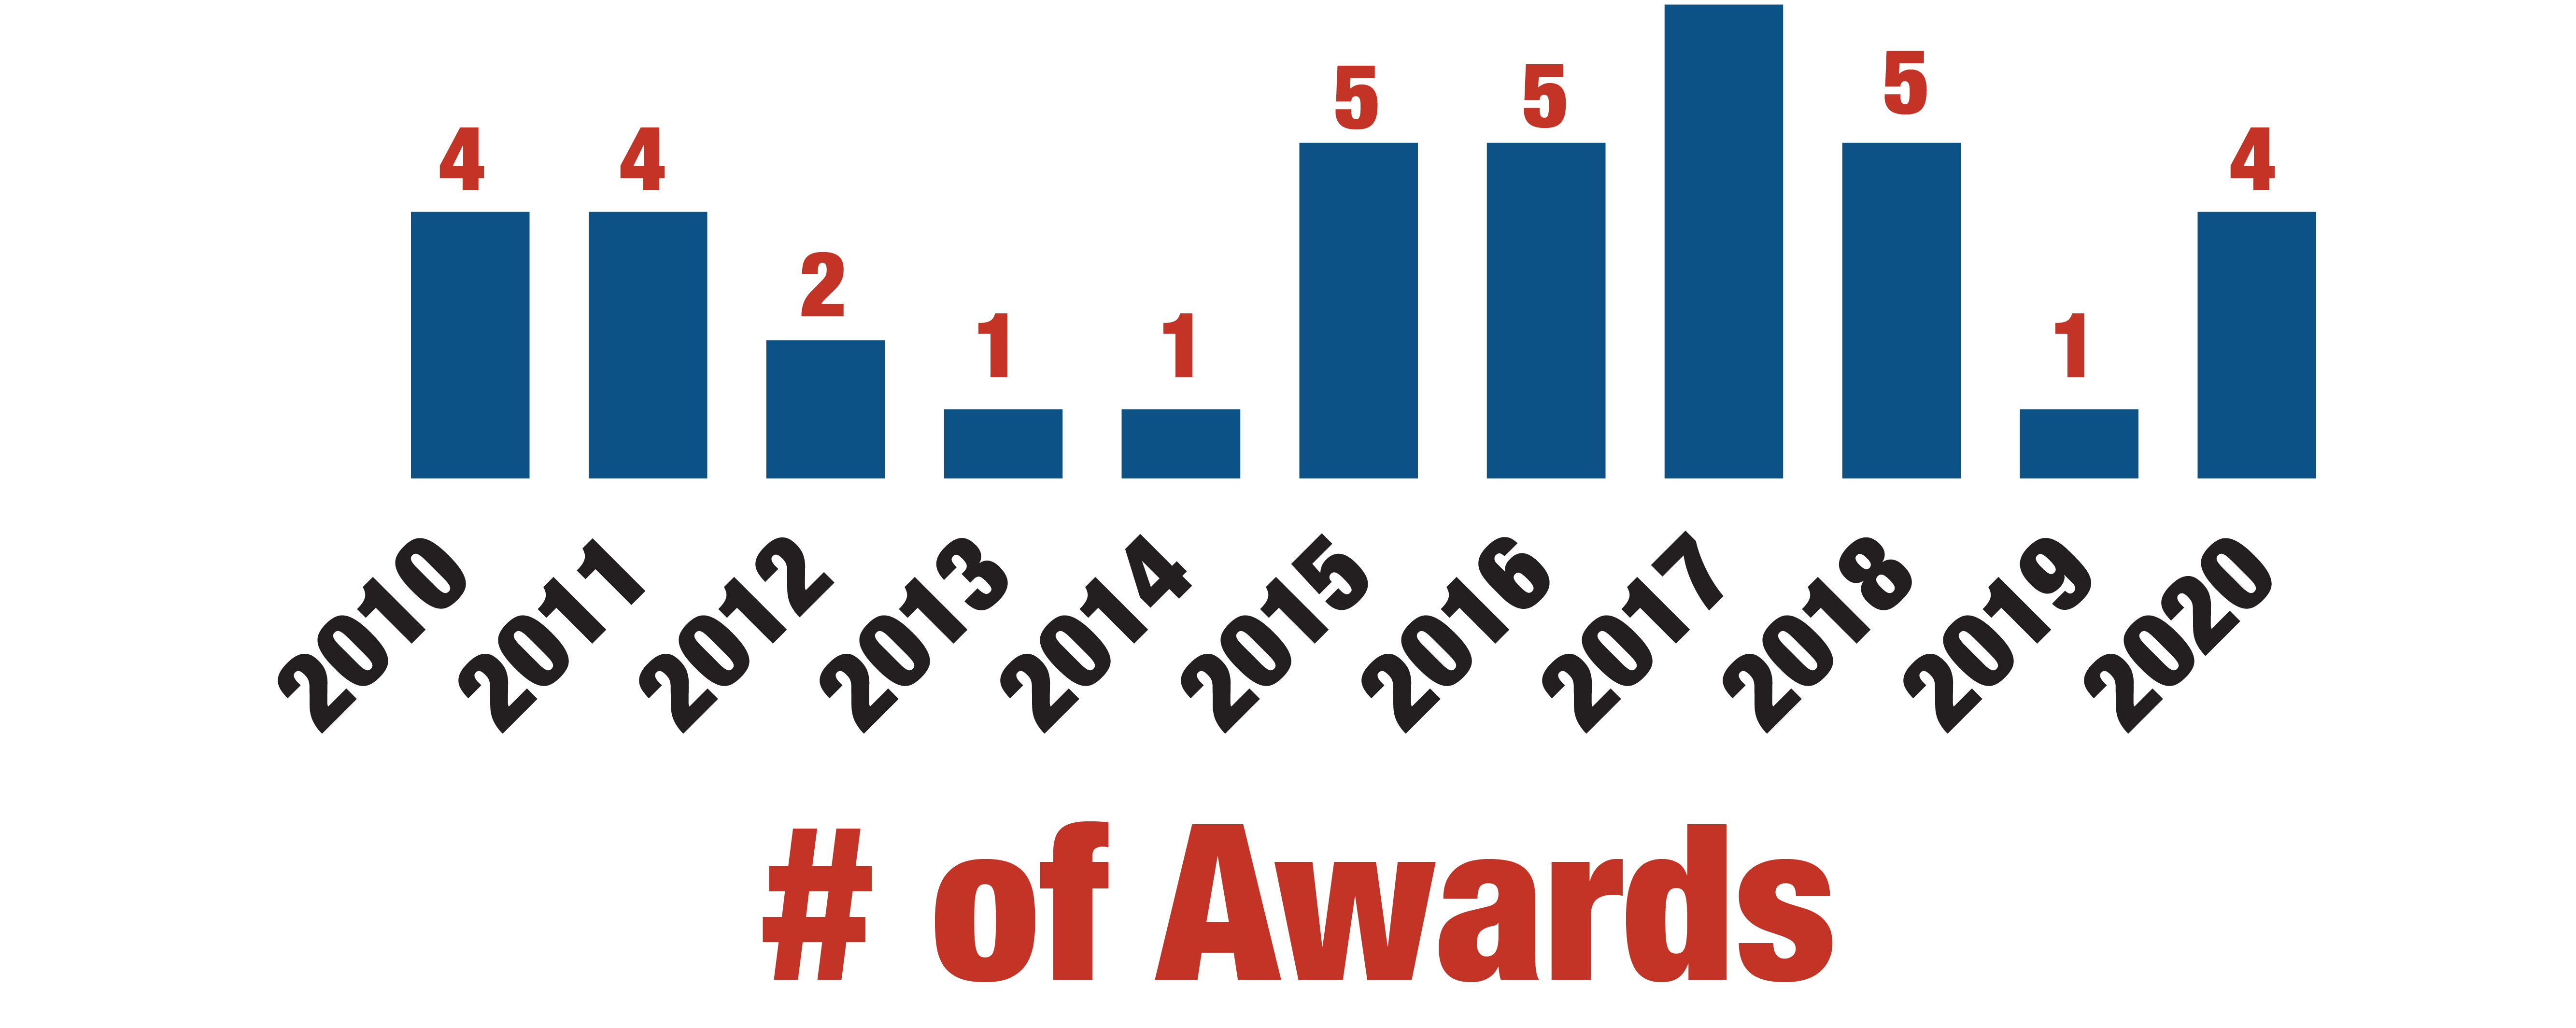 number of awards with ORDC assistance